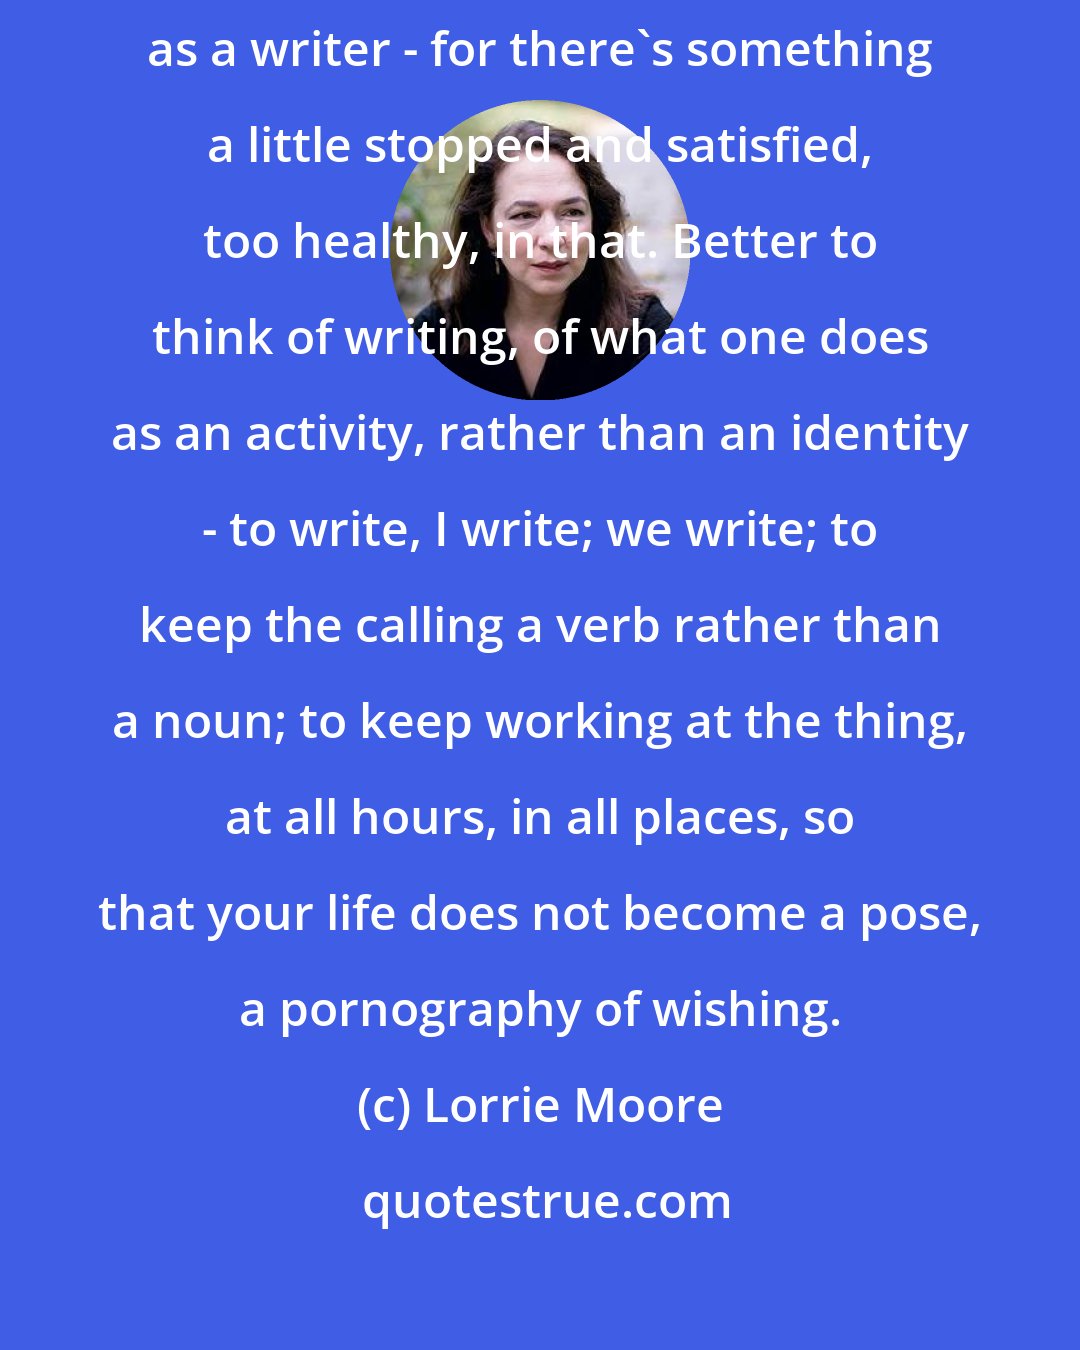 Lorrie Moore: Perhaps one would be wise when young even to avoid thinking of oneself as a writer - for there's something a little stopped and satisfied, too healthy, in that. Better to think of writing, of what one does as an activity, rather than an identity - to write, I write; we write; to keep the calling a verb rather than a noun; to keep working at the thing, at all hours, in all places, so that your life does not become a pose, a pornography of wishing.